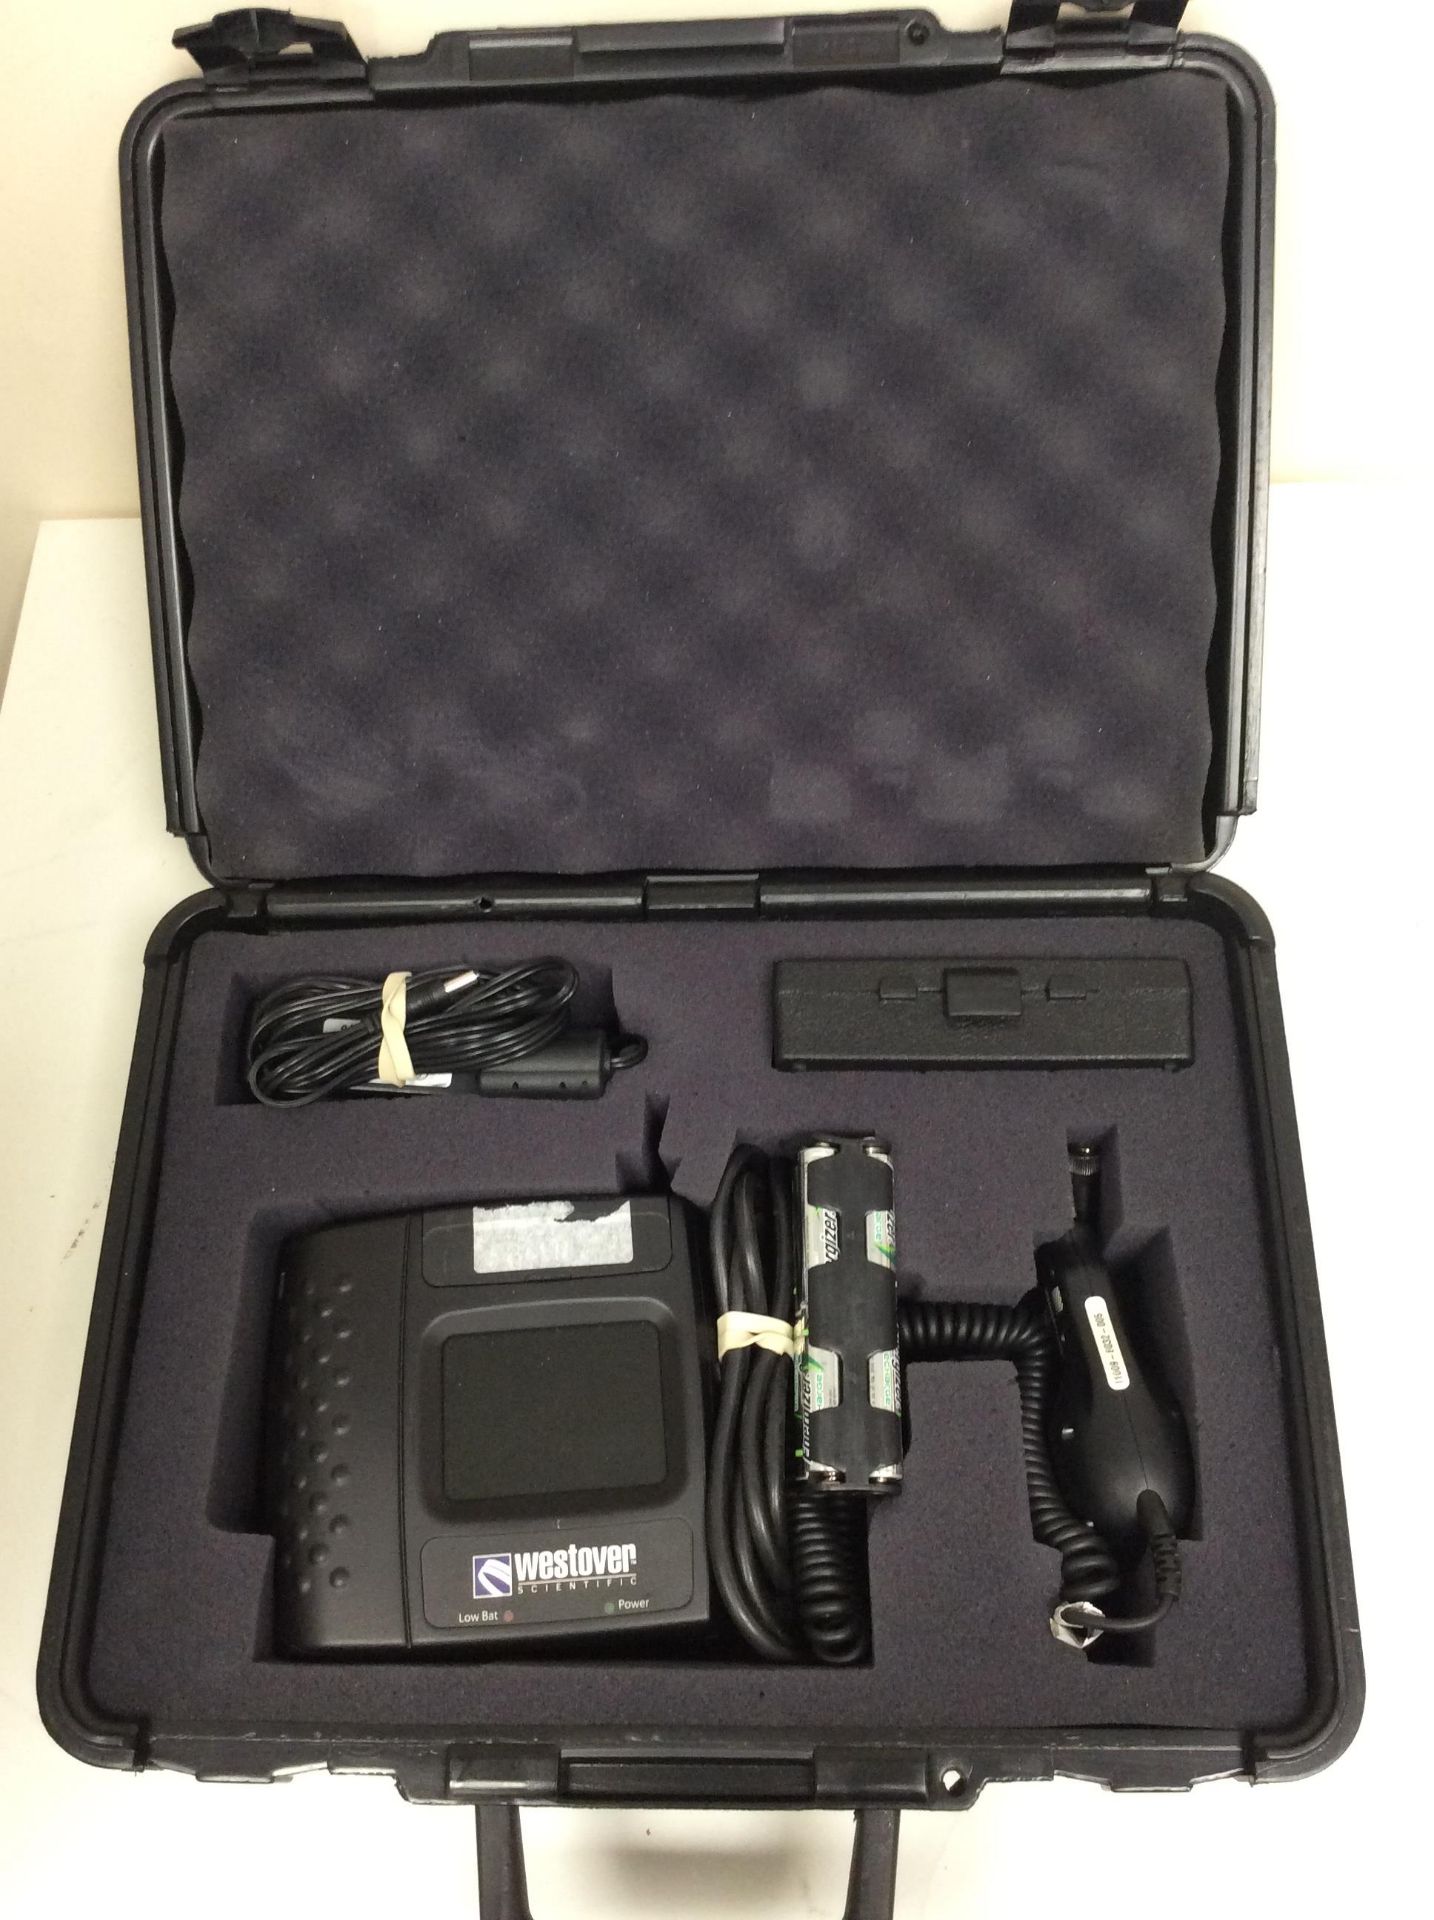 Westover zp-hde-9020 in carry case fbp probe microsc0pe and hd2 display